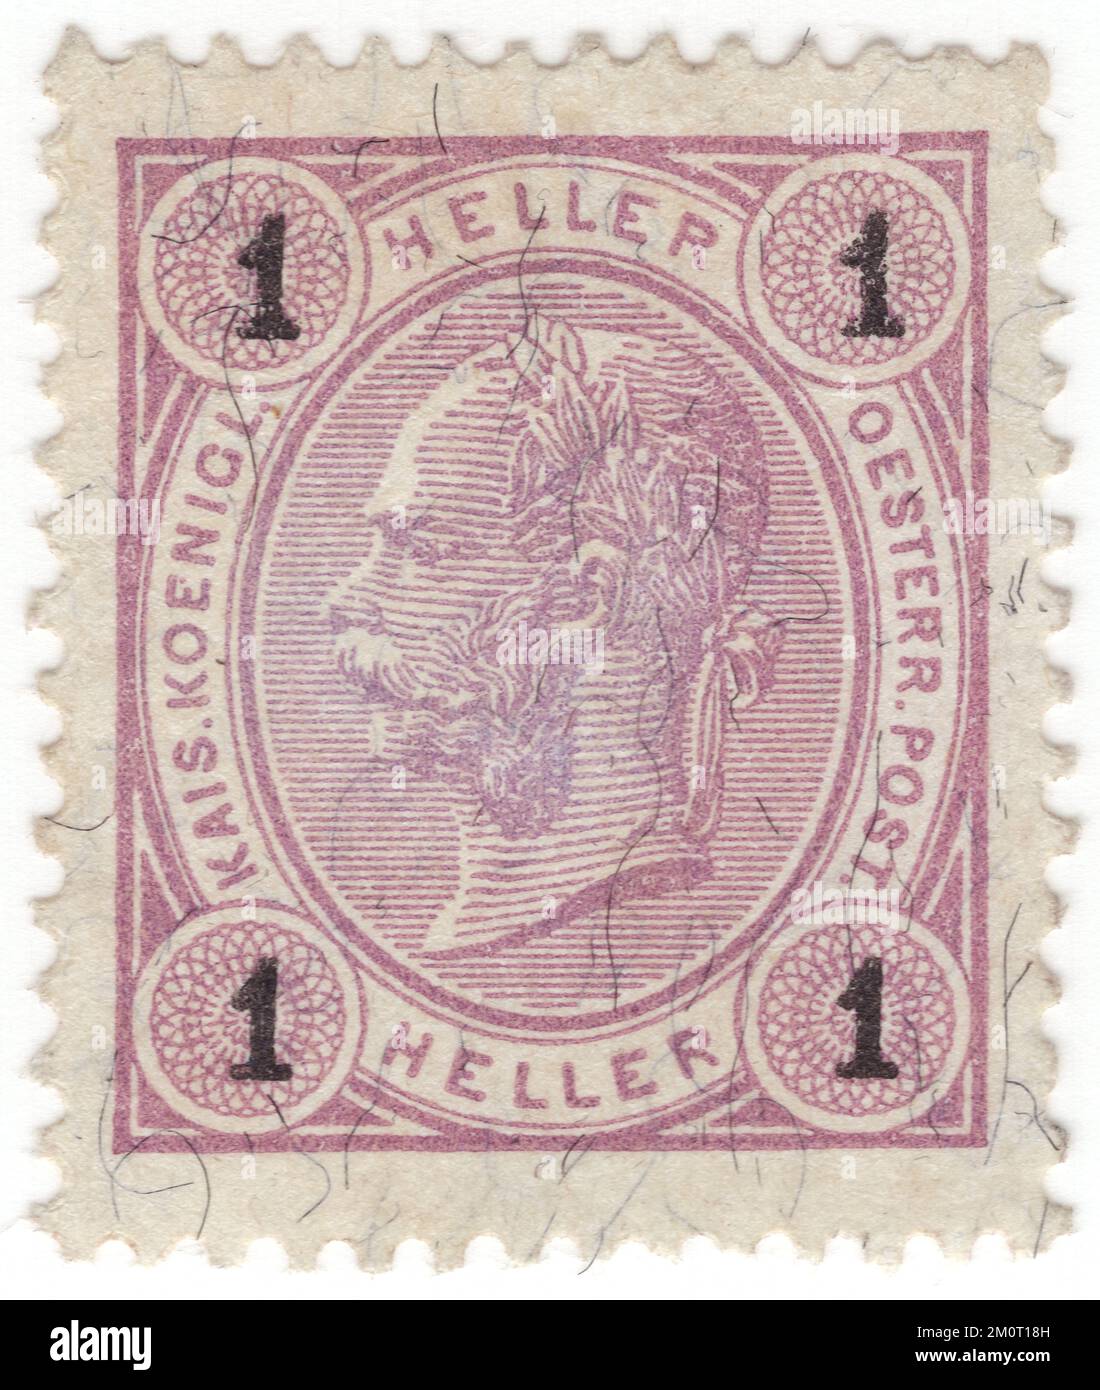 AUSTRIA — 1899: An 1 heller pale lilac postage stamp depicting Embossed portrait of young Austrian Monarch Emperor Franz Josef. Franz Joseph I or Francis Joseph I was Emperor of Austria, King of Hungary, and the other states of the Habsburg monarchy from 2 December 1848 until his death on 21 November 1916. In the early part of his reign, his realms and territories were referred to as the Austrian Empire, but were reconstituted as the dual monarchy of the Austro-Hungarian Empire in 1867. From 1 May 1850 to 24 August 1866, Franz Joseph was also President of the German Confederation Stock Photo